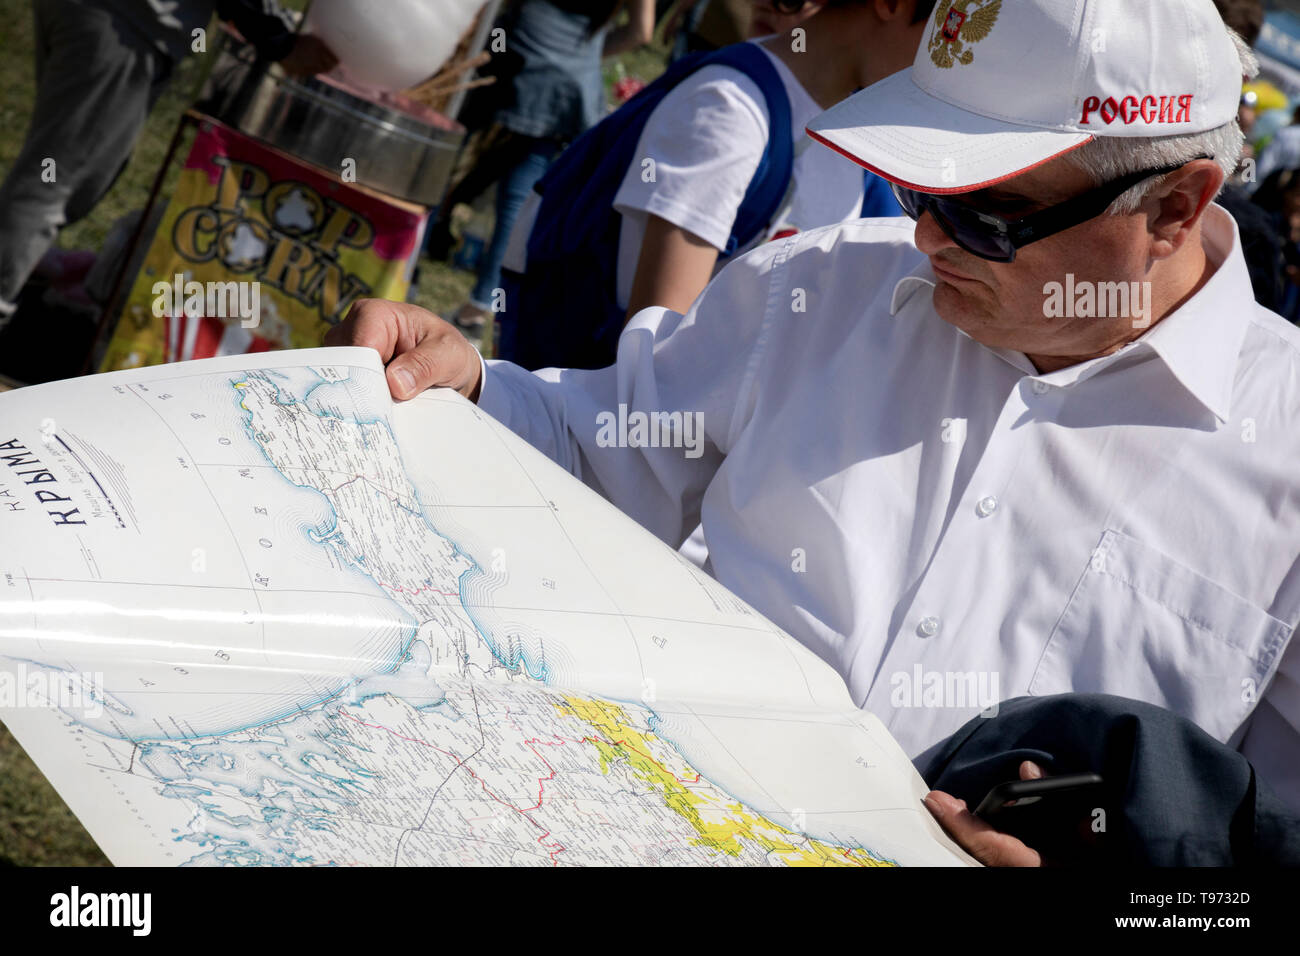 A man examines a map of the Crimean Peninsula on a holiday in the city of Bakhchisarai, Republic of Crimea Stock Photo